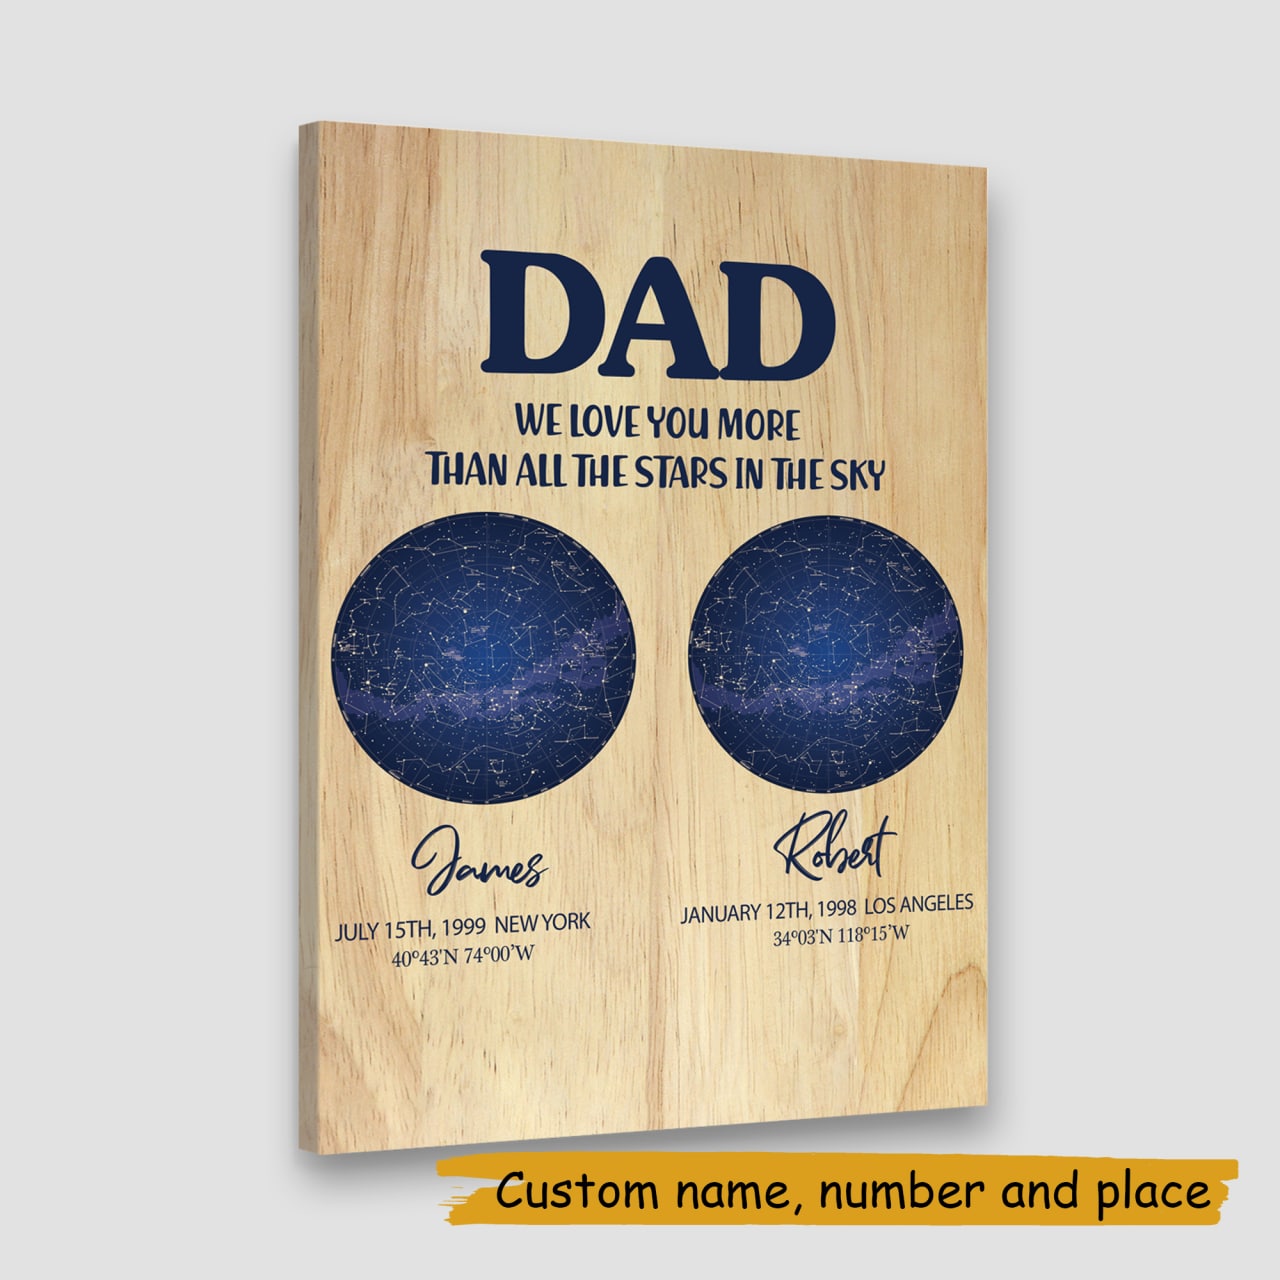 Dad Personalized Canvas